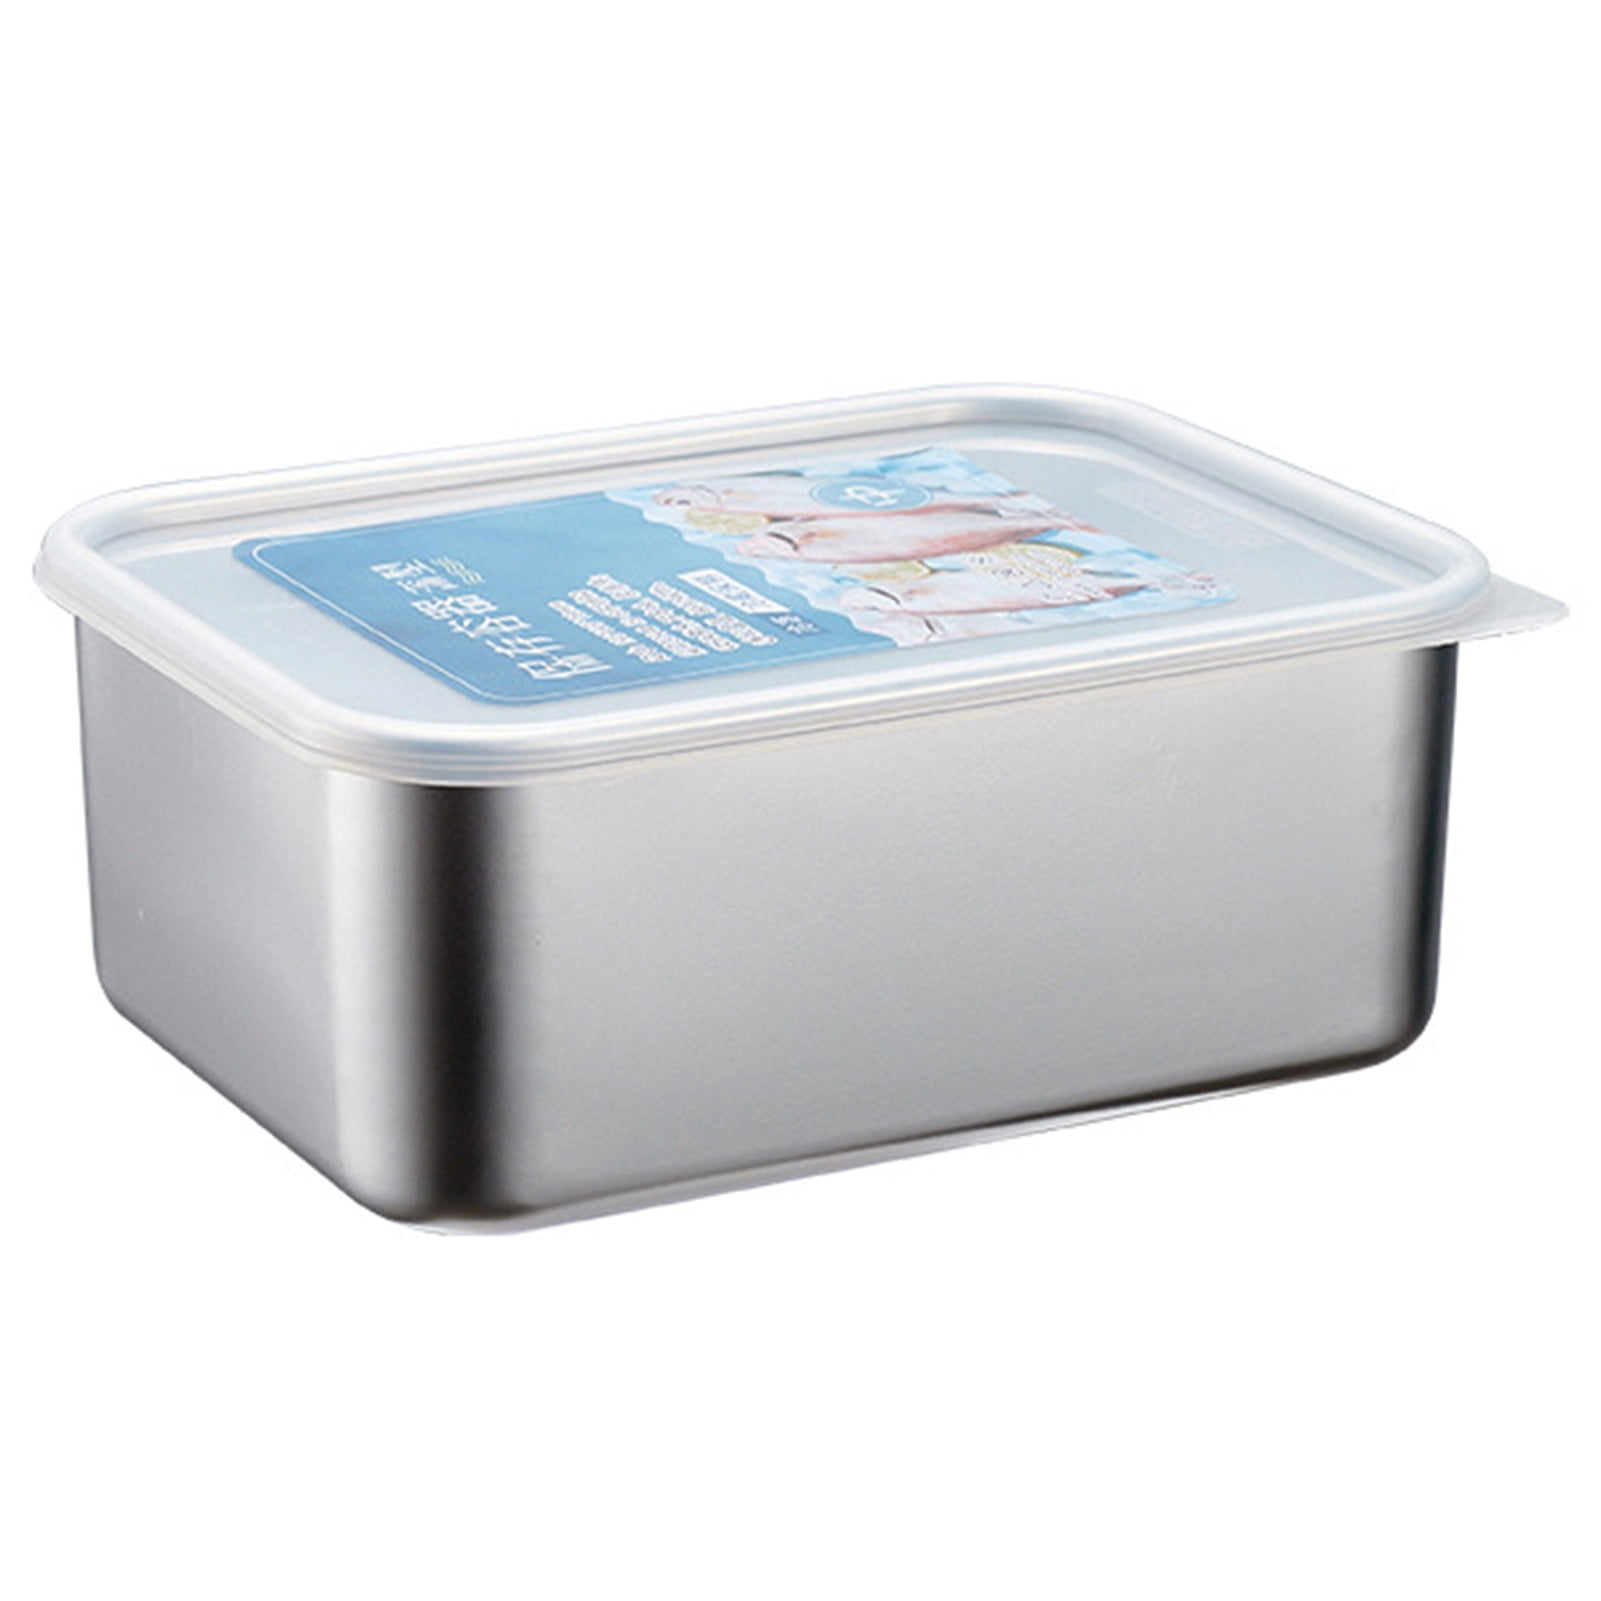 FREEZABLE GEL LID STORAGE CONTAINER, 45641